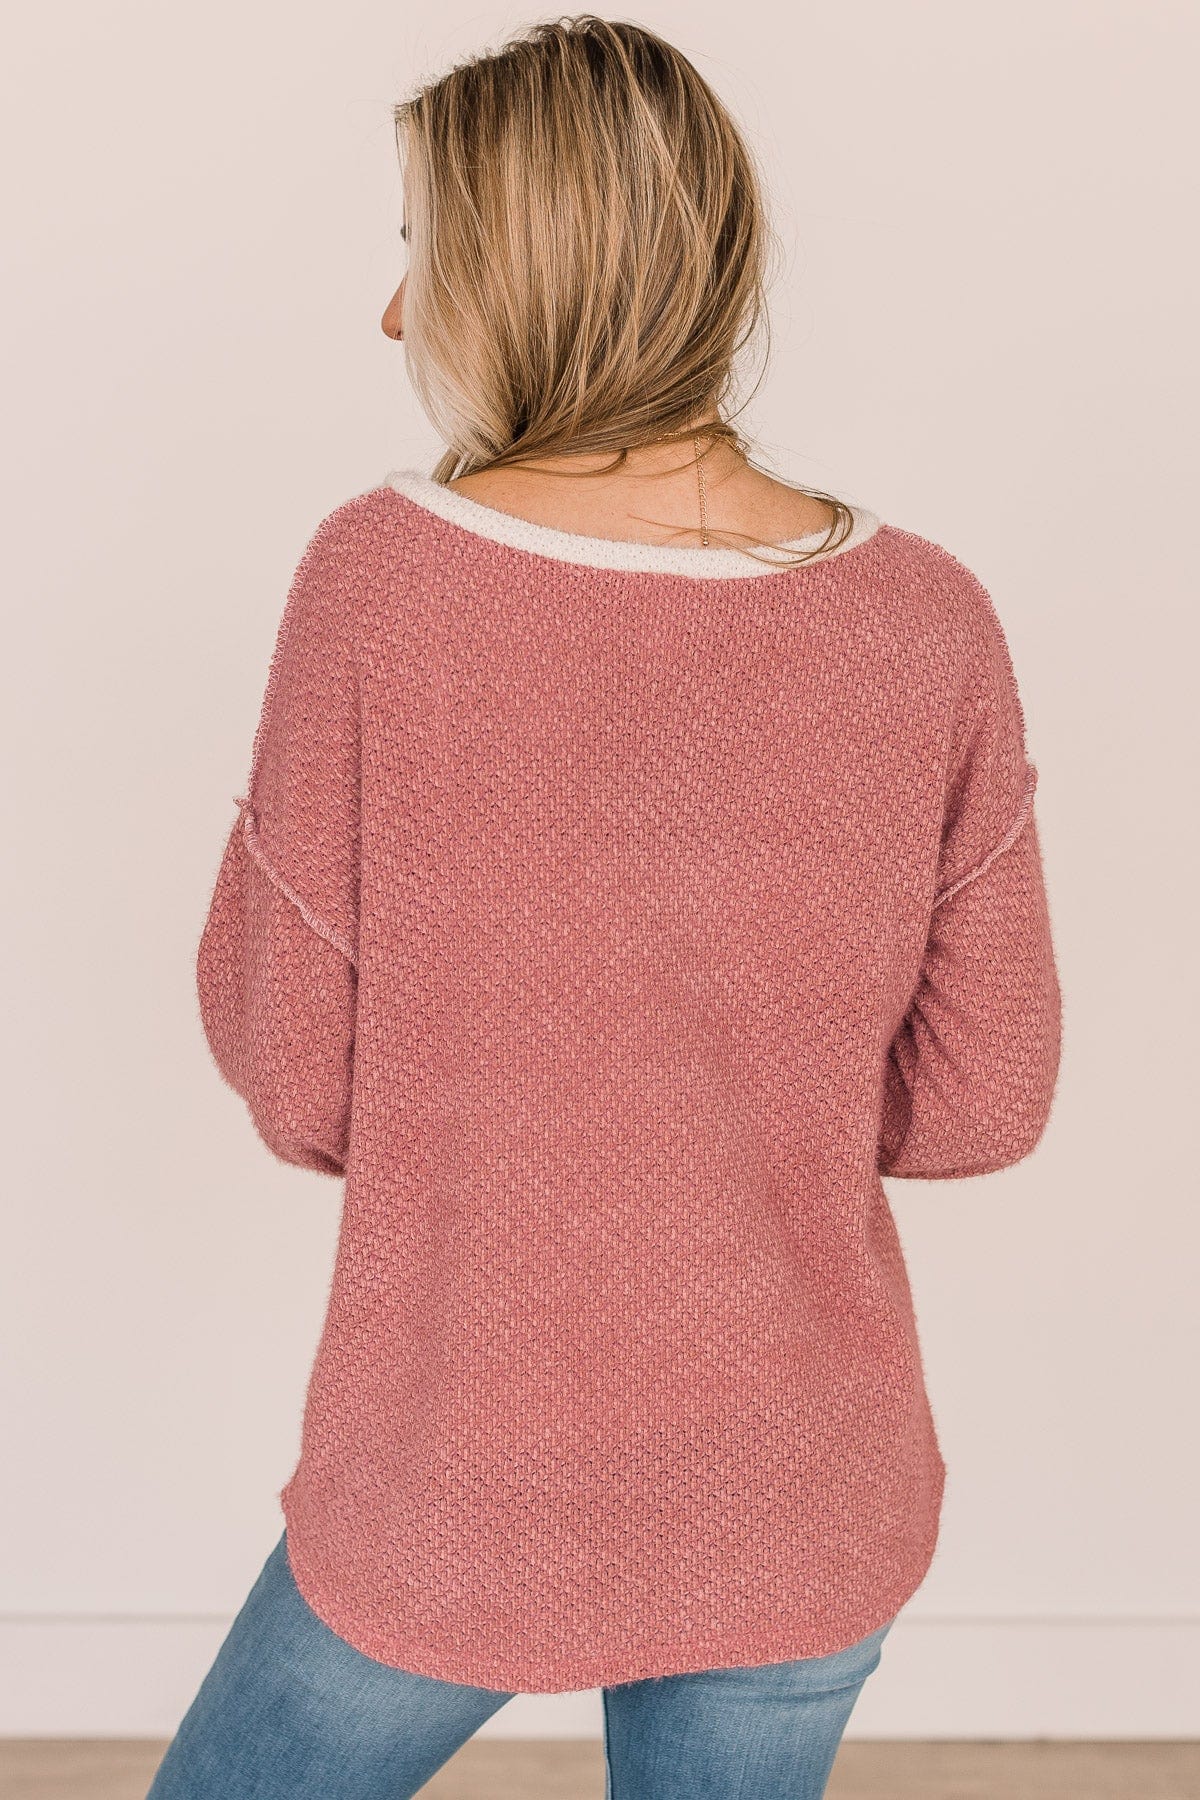 Take Your Chance Button Knit Top- Ivory & Dusty Rose